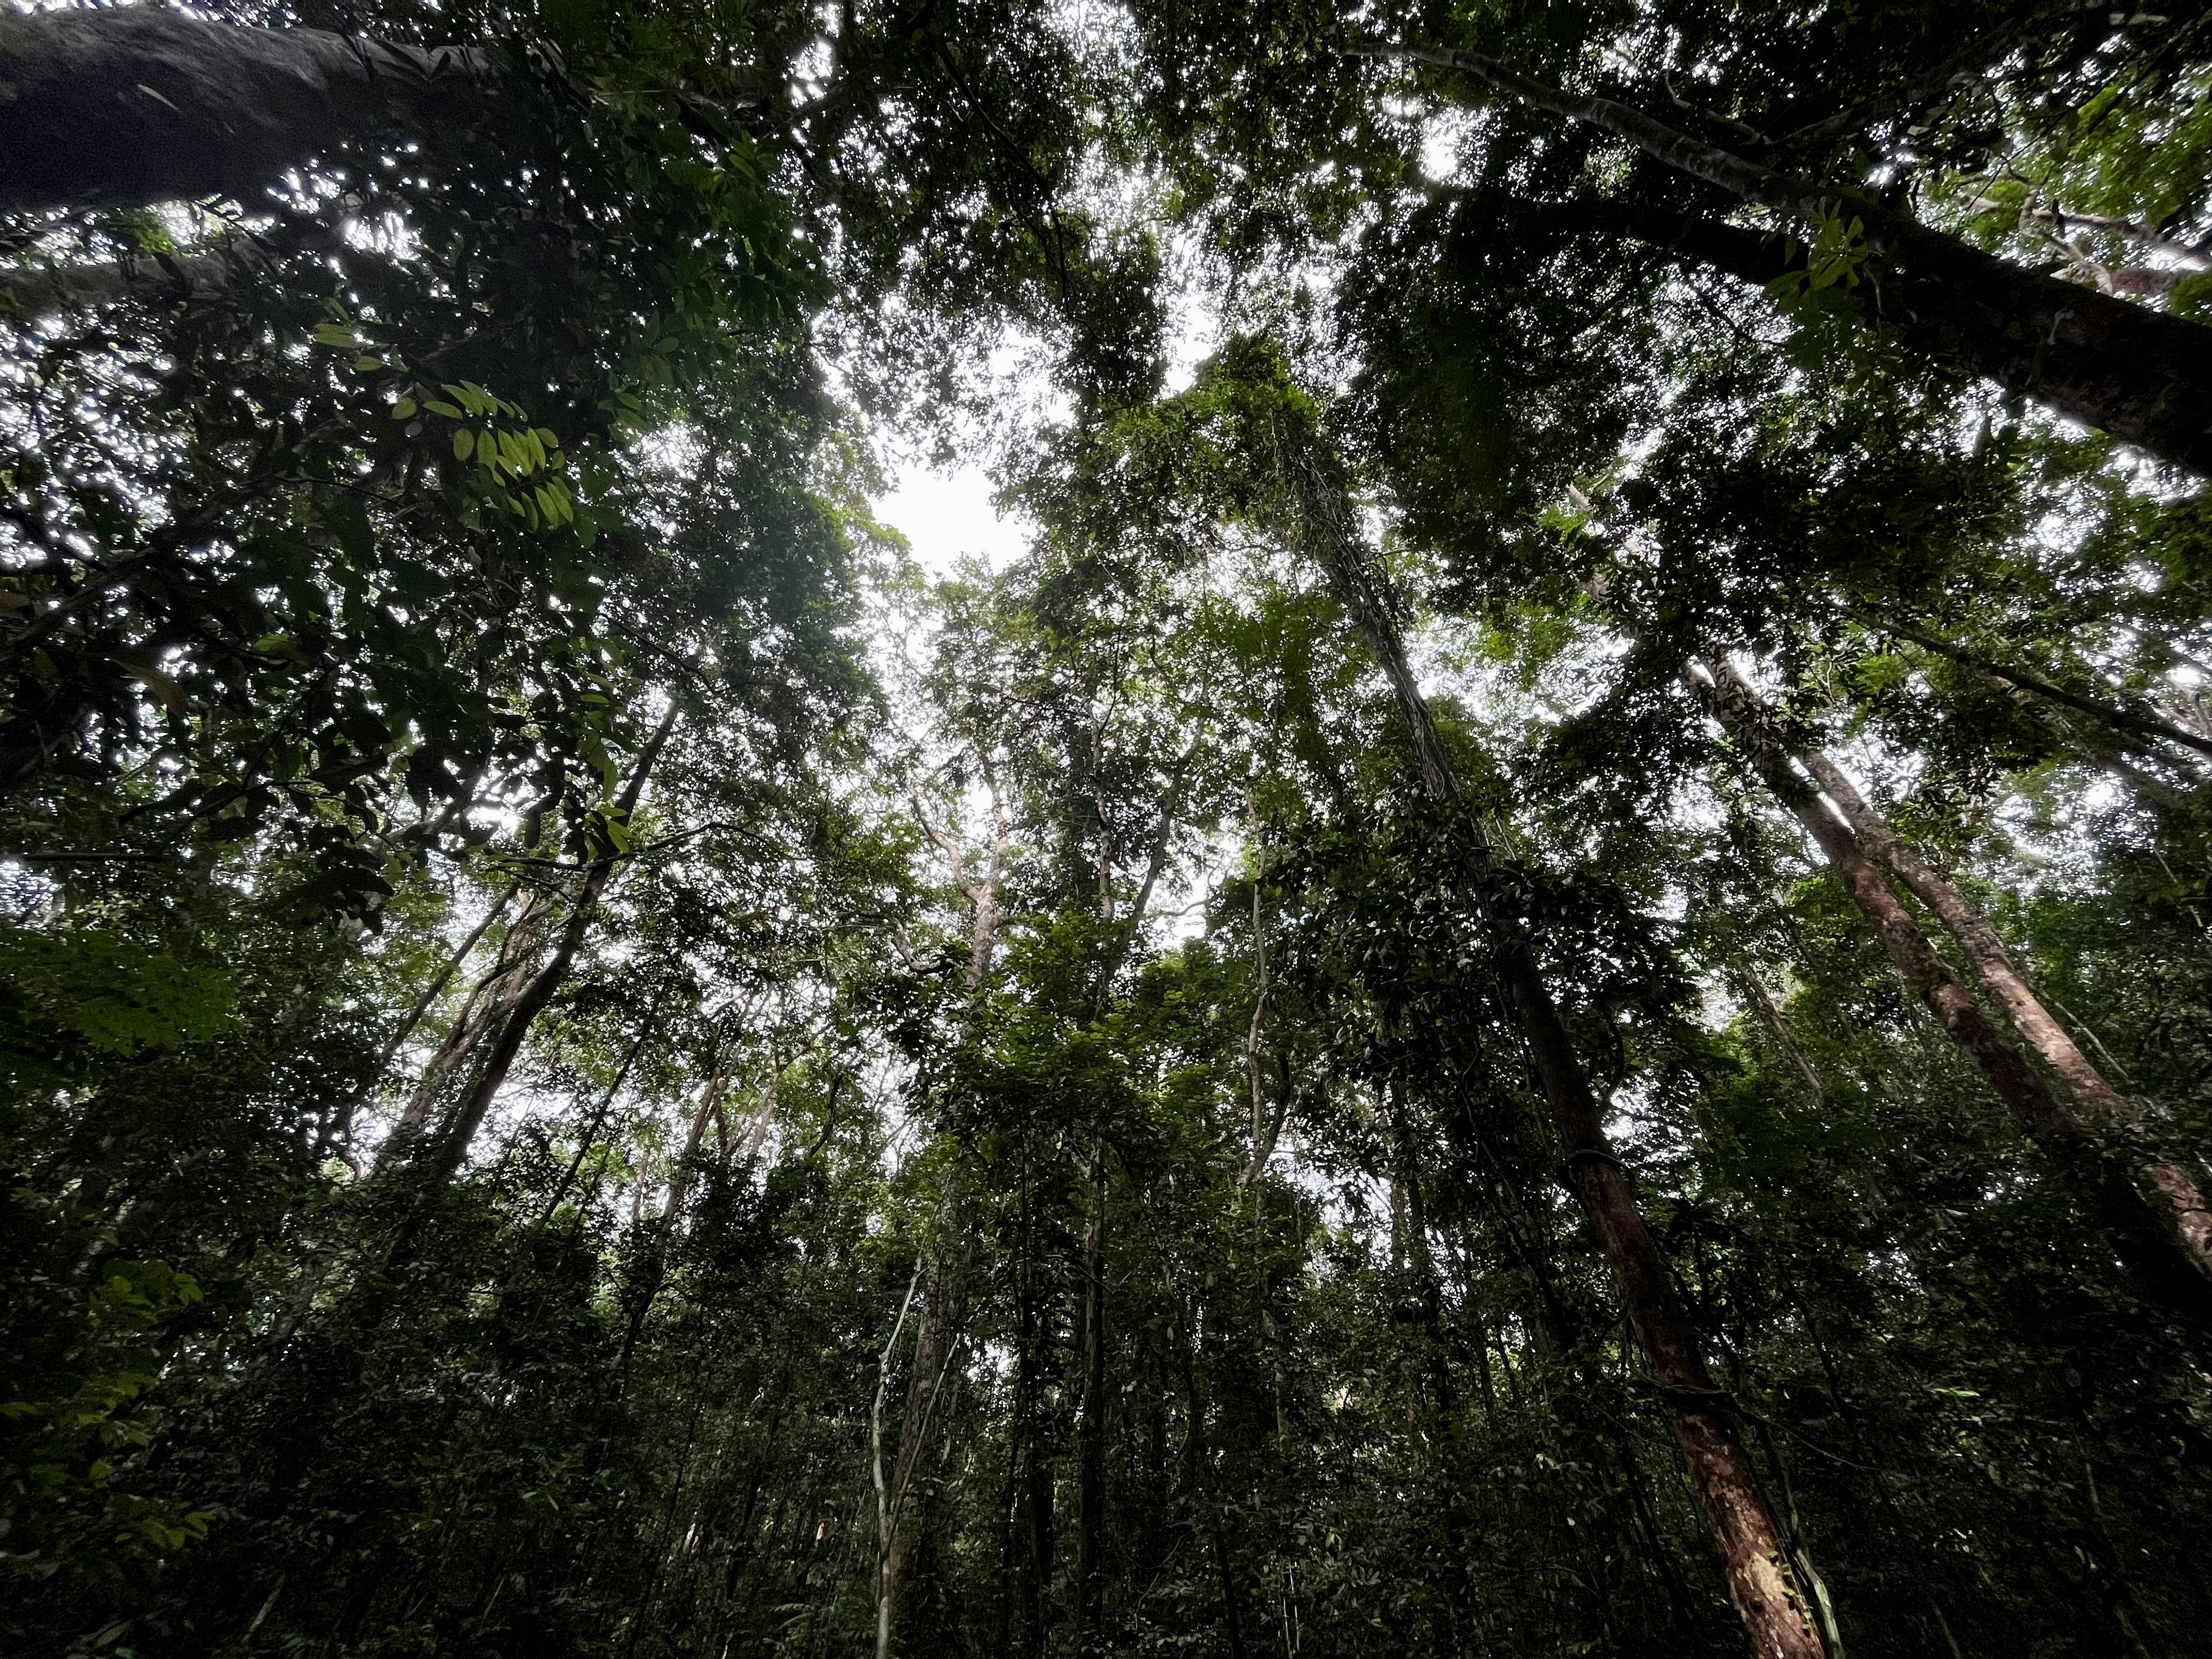 Forest covers 88% of Gabon (Emily Beament/PA)